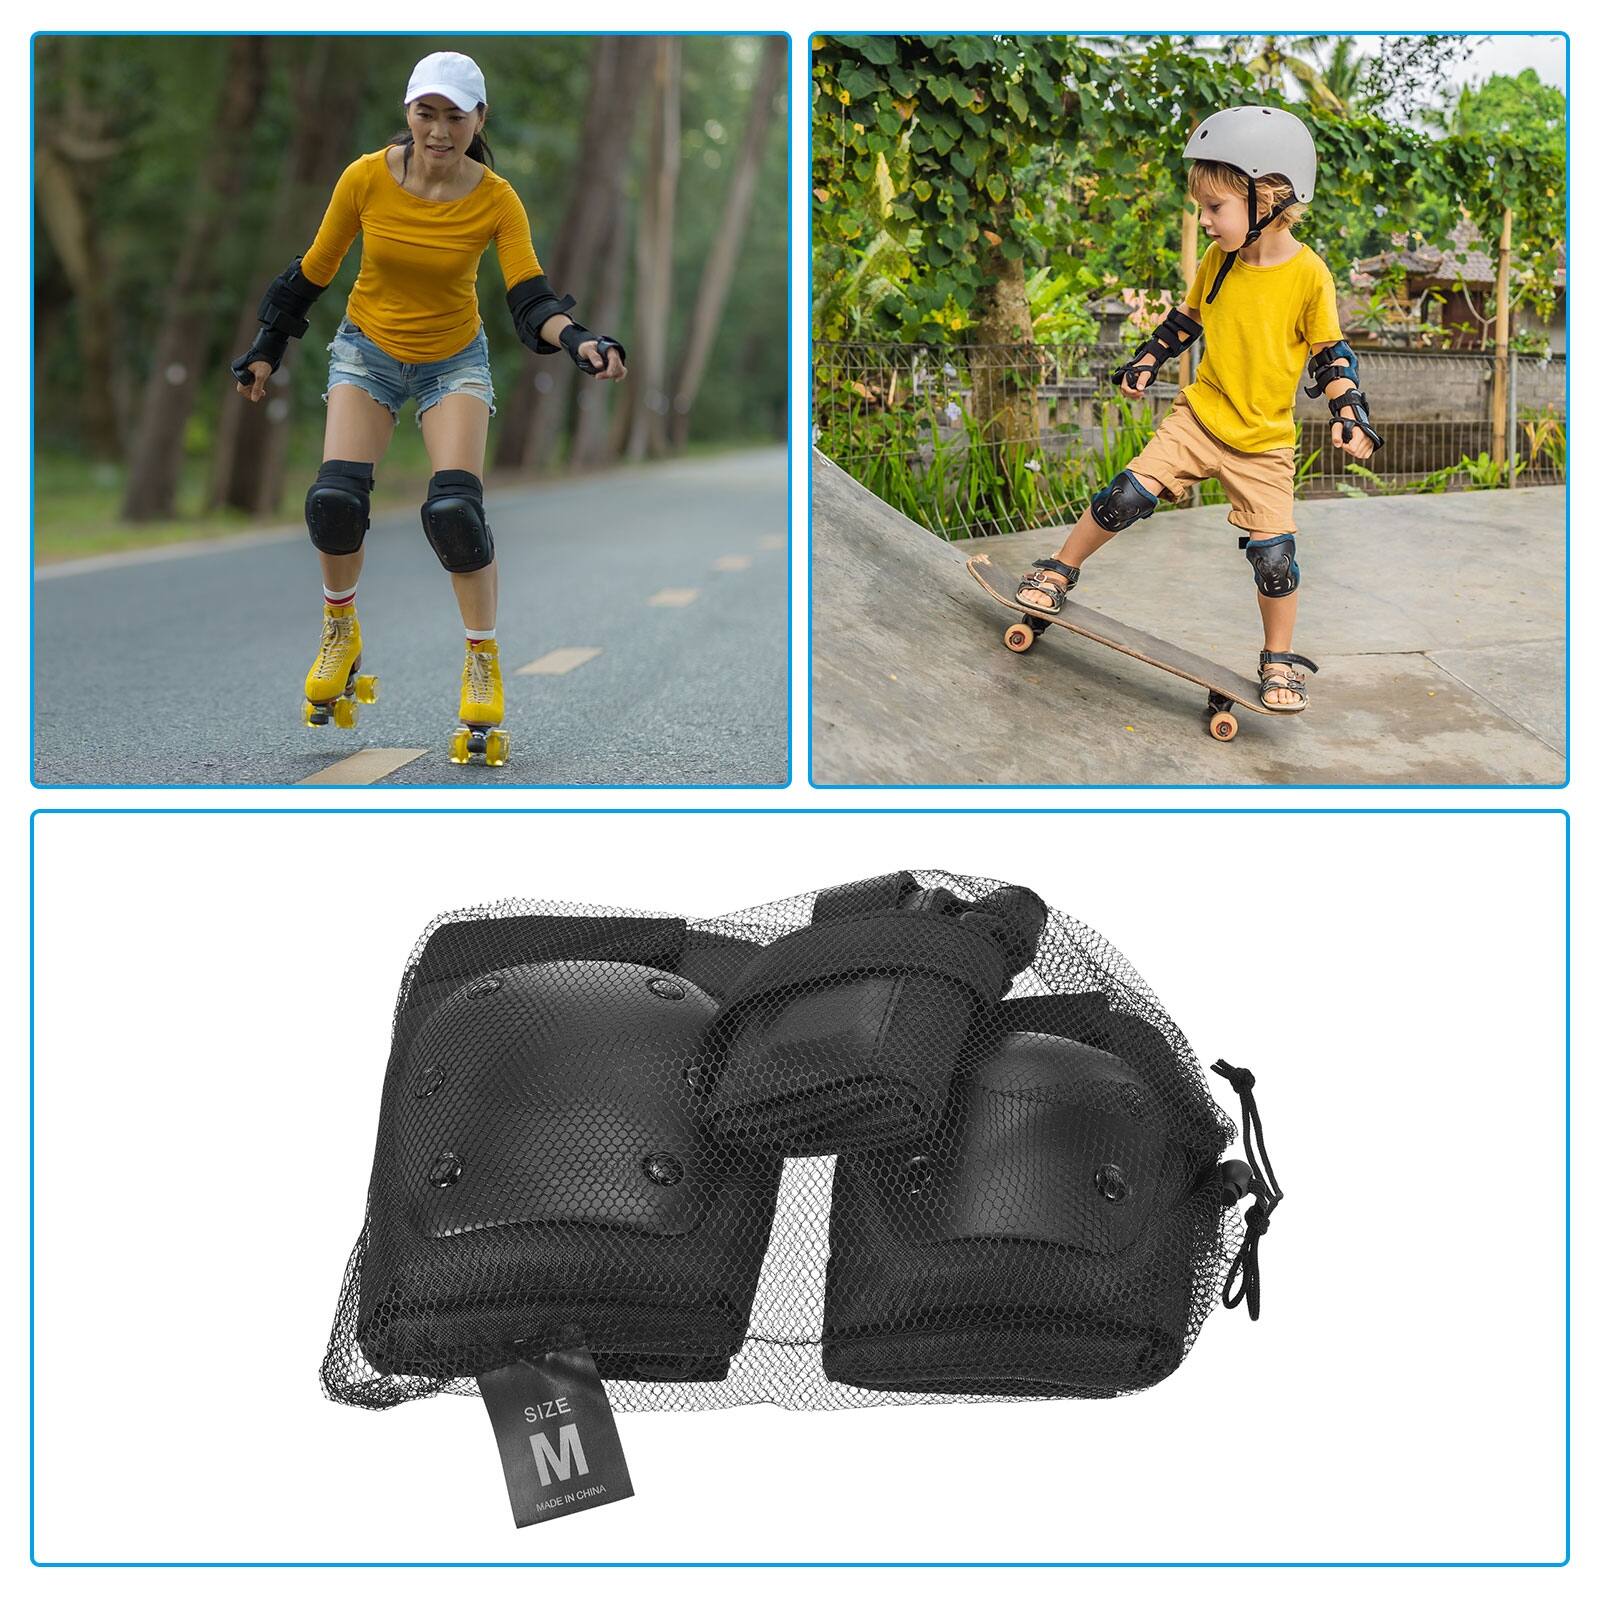 3 in 1 Knee Pads Elbow Pads Wrist Guards Set for Skateboarding, M Size Black